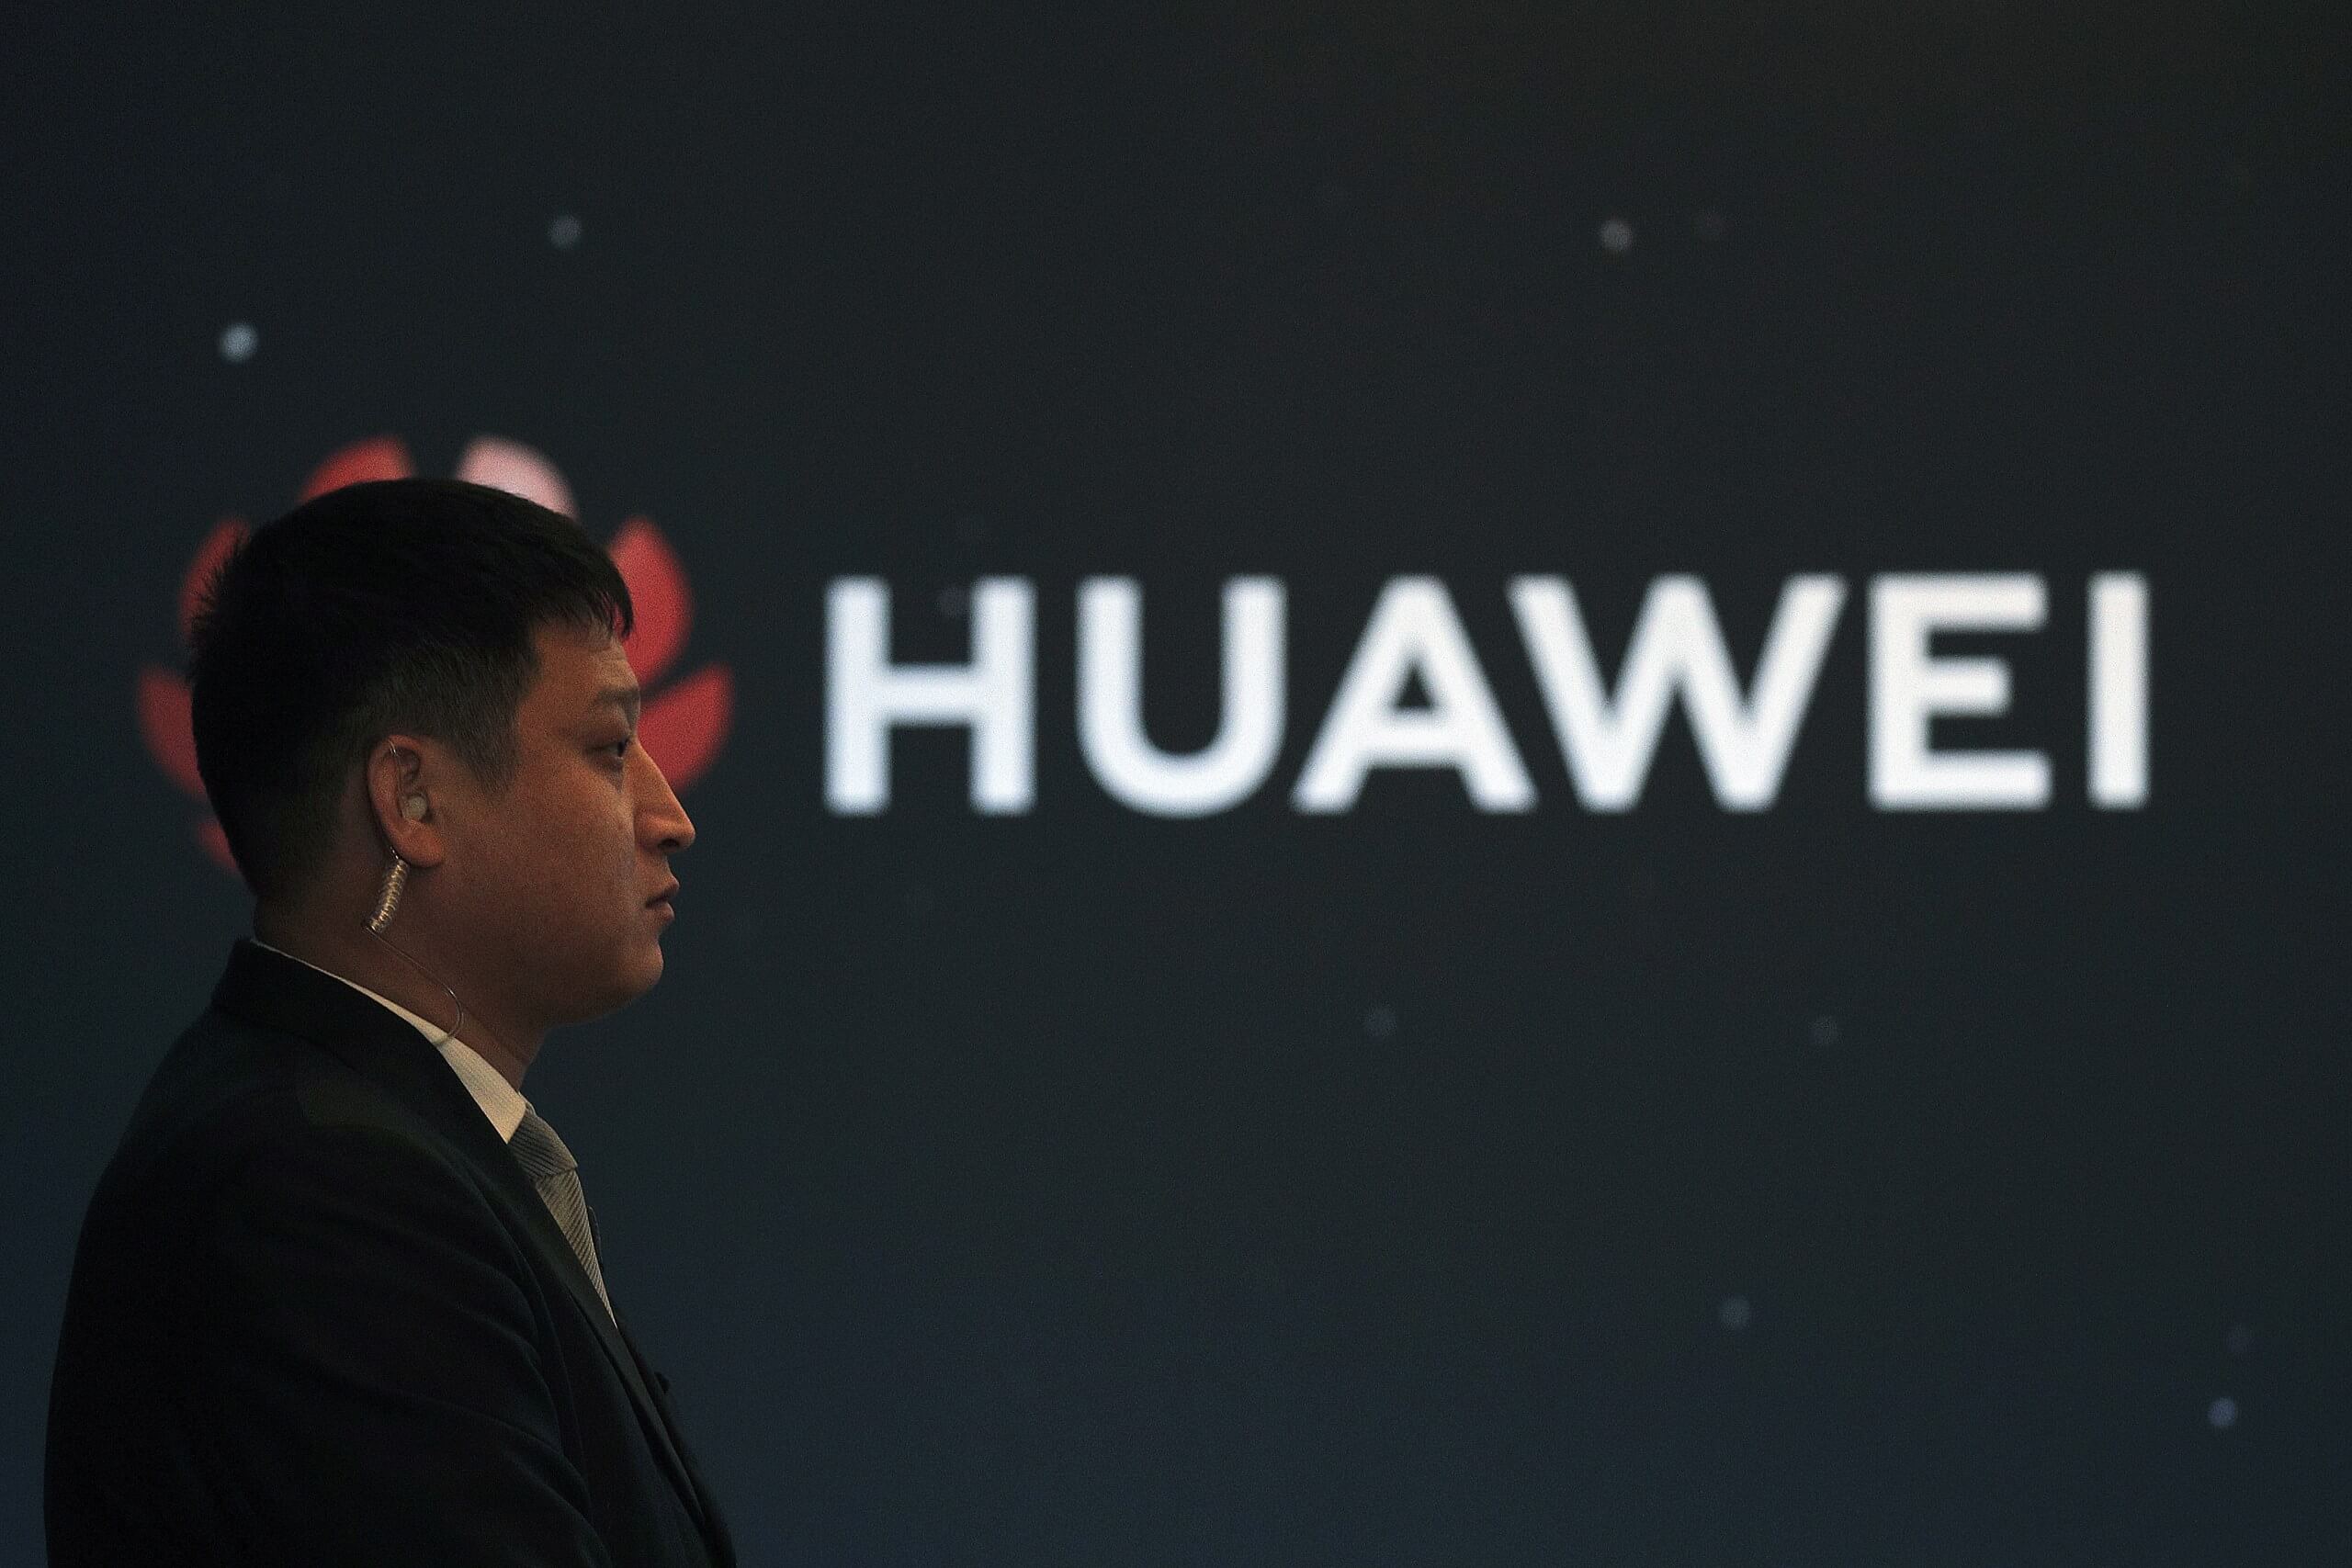 Canadian government approves extradition process in Huawei CFO case